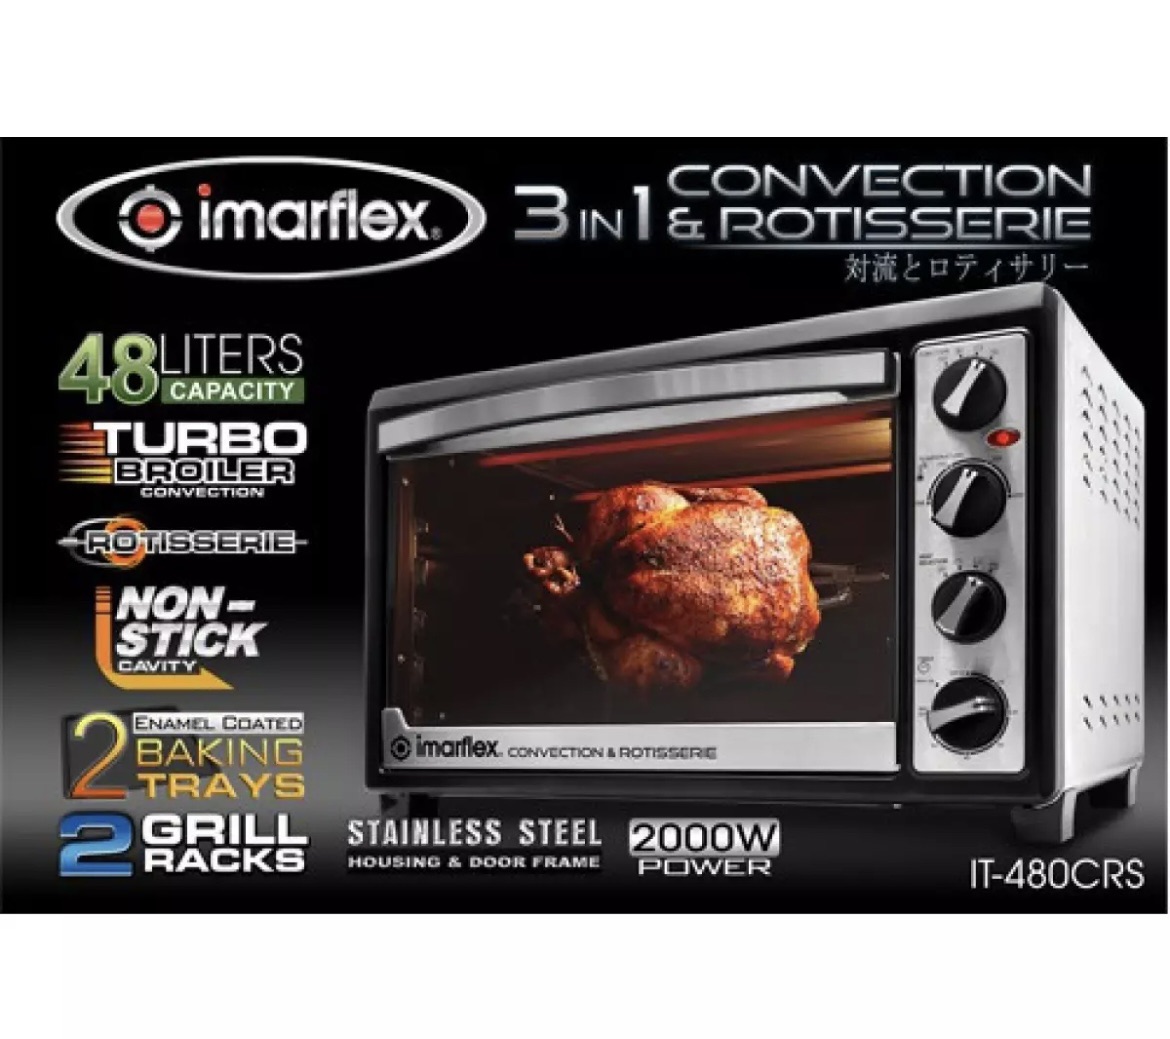 IT-480CRS Imarflex 3in1 Convection & Rotisserie Oven Toaster